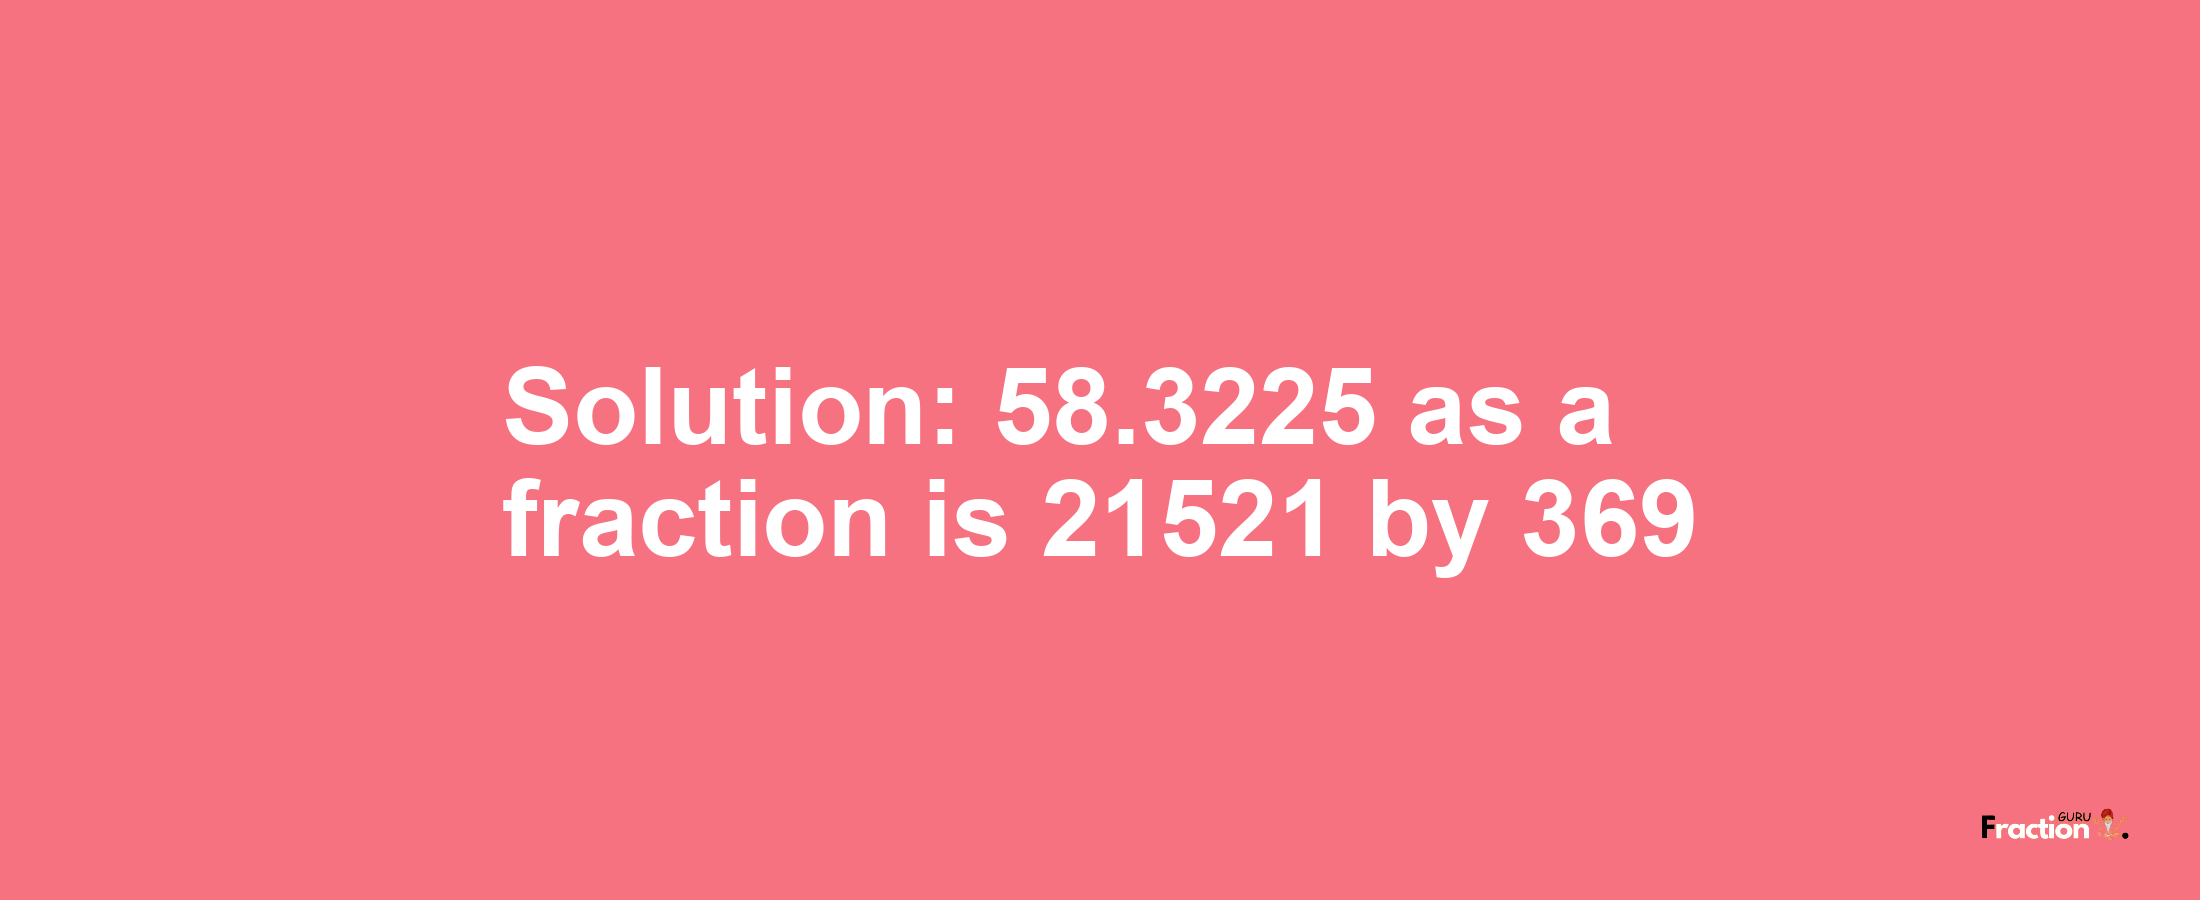 Solution:58.3225 as a fraction is 21521/369